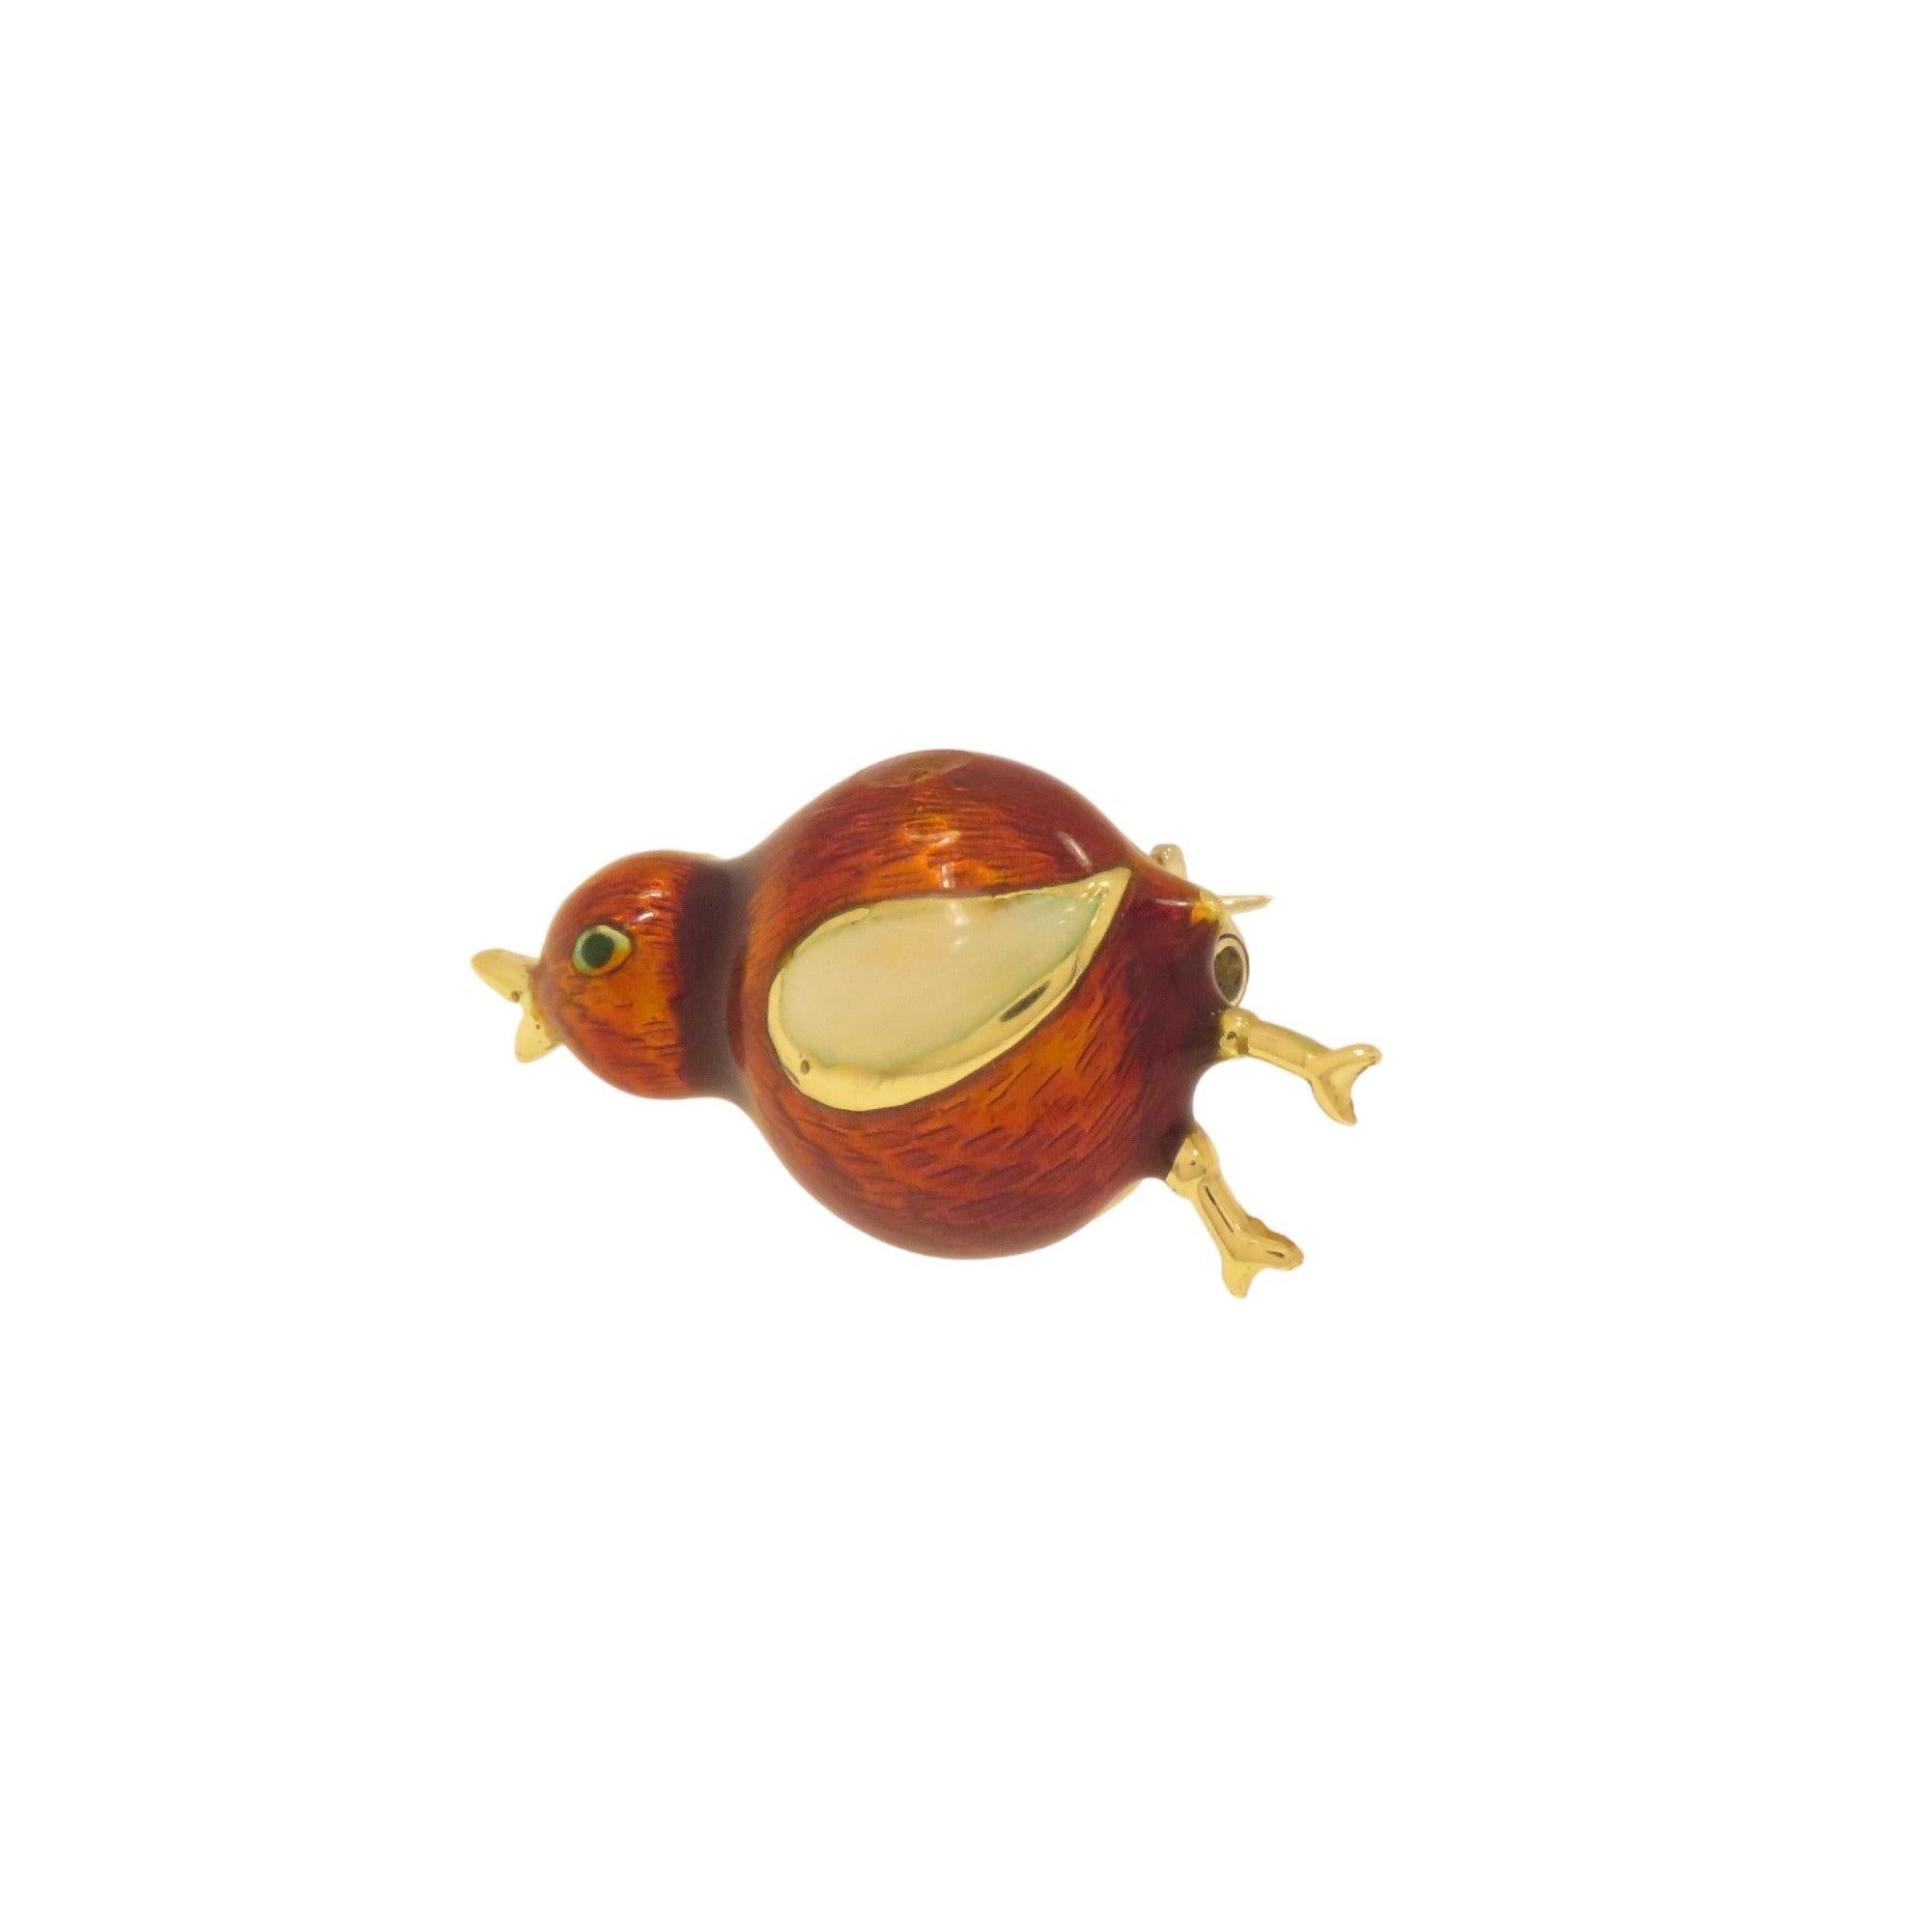 Pretty brooch depicting a chick handcrafted in 18K gold and fire enameled, produced between 1960 and 1970. The measurements of the brooch are 26x13 mm / 1.023x0.511 inches. The brooch has the 750 mark of 18K gold. The total weight is 4.4 grams.